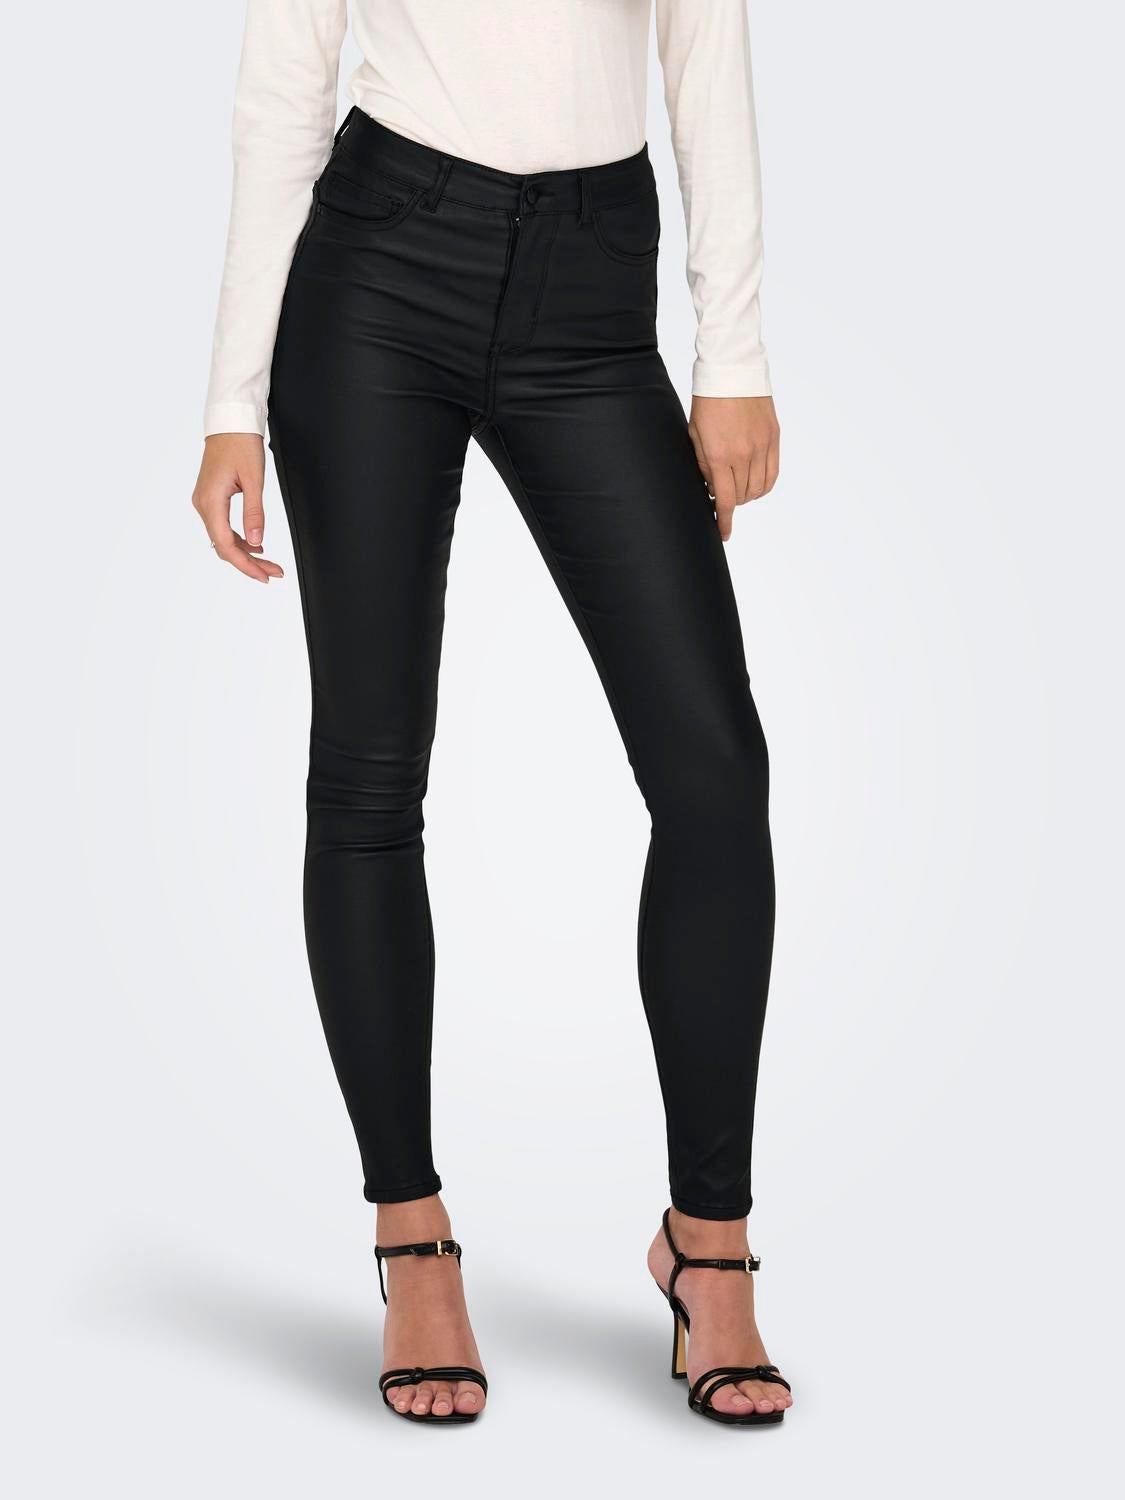 Black Asymmetrical Pants with Chain / Gothic Skinny Trousers